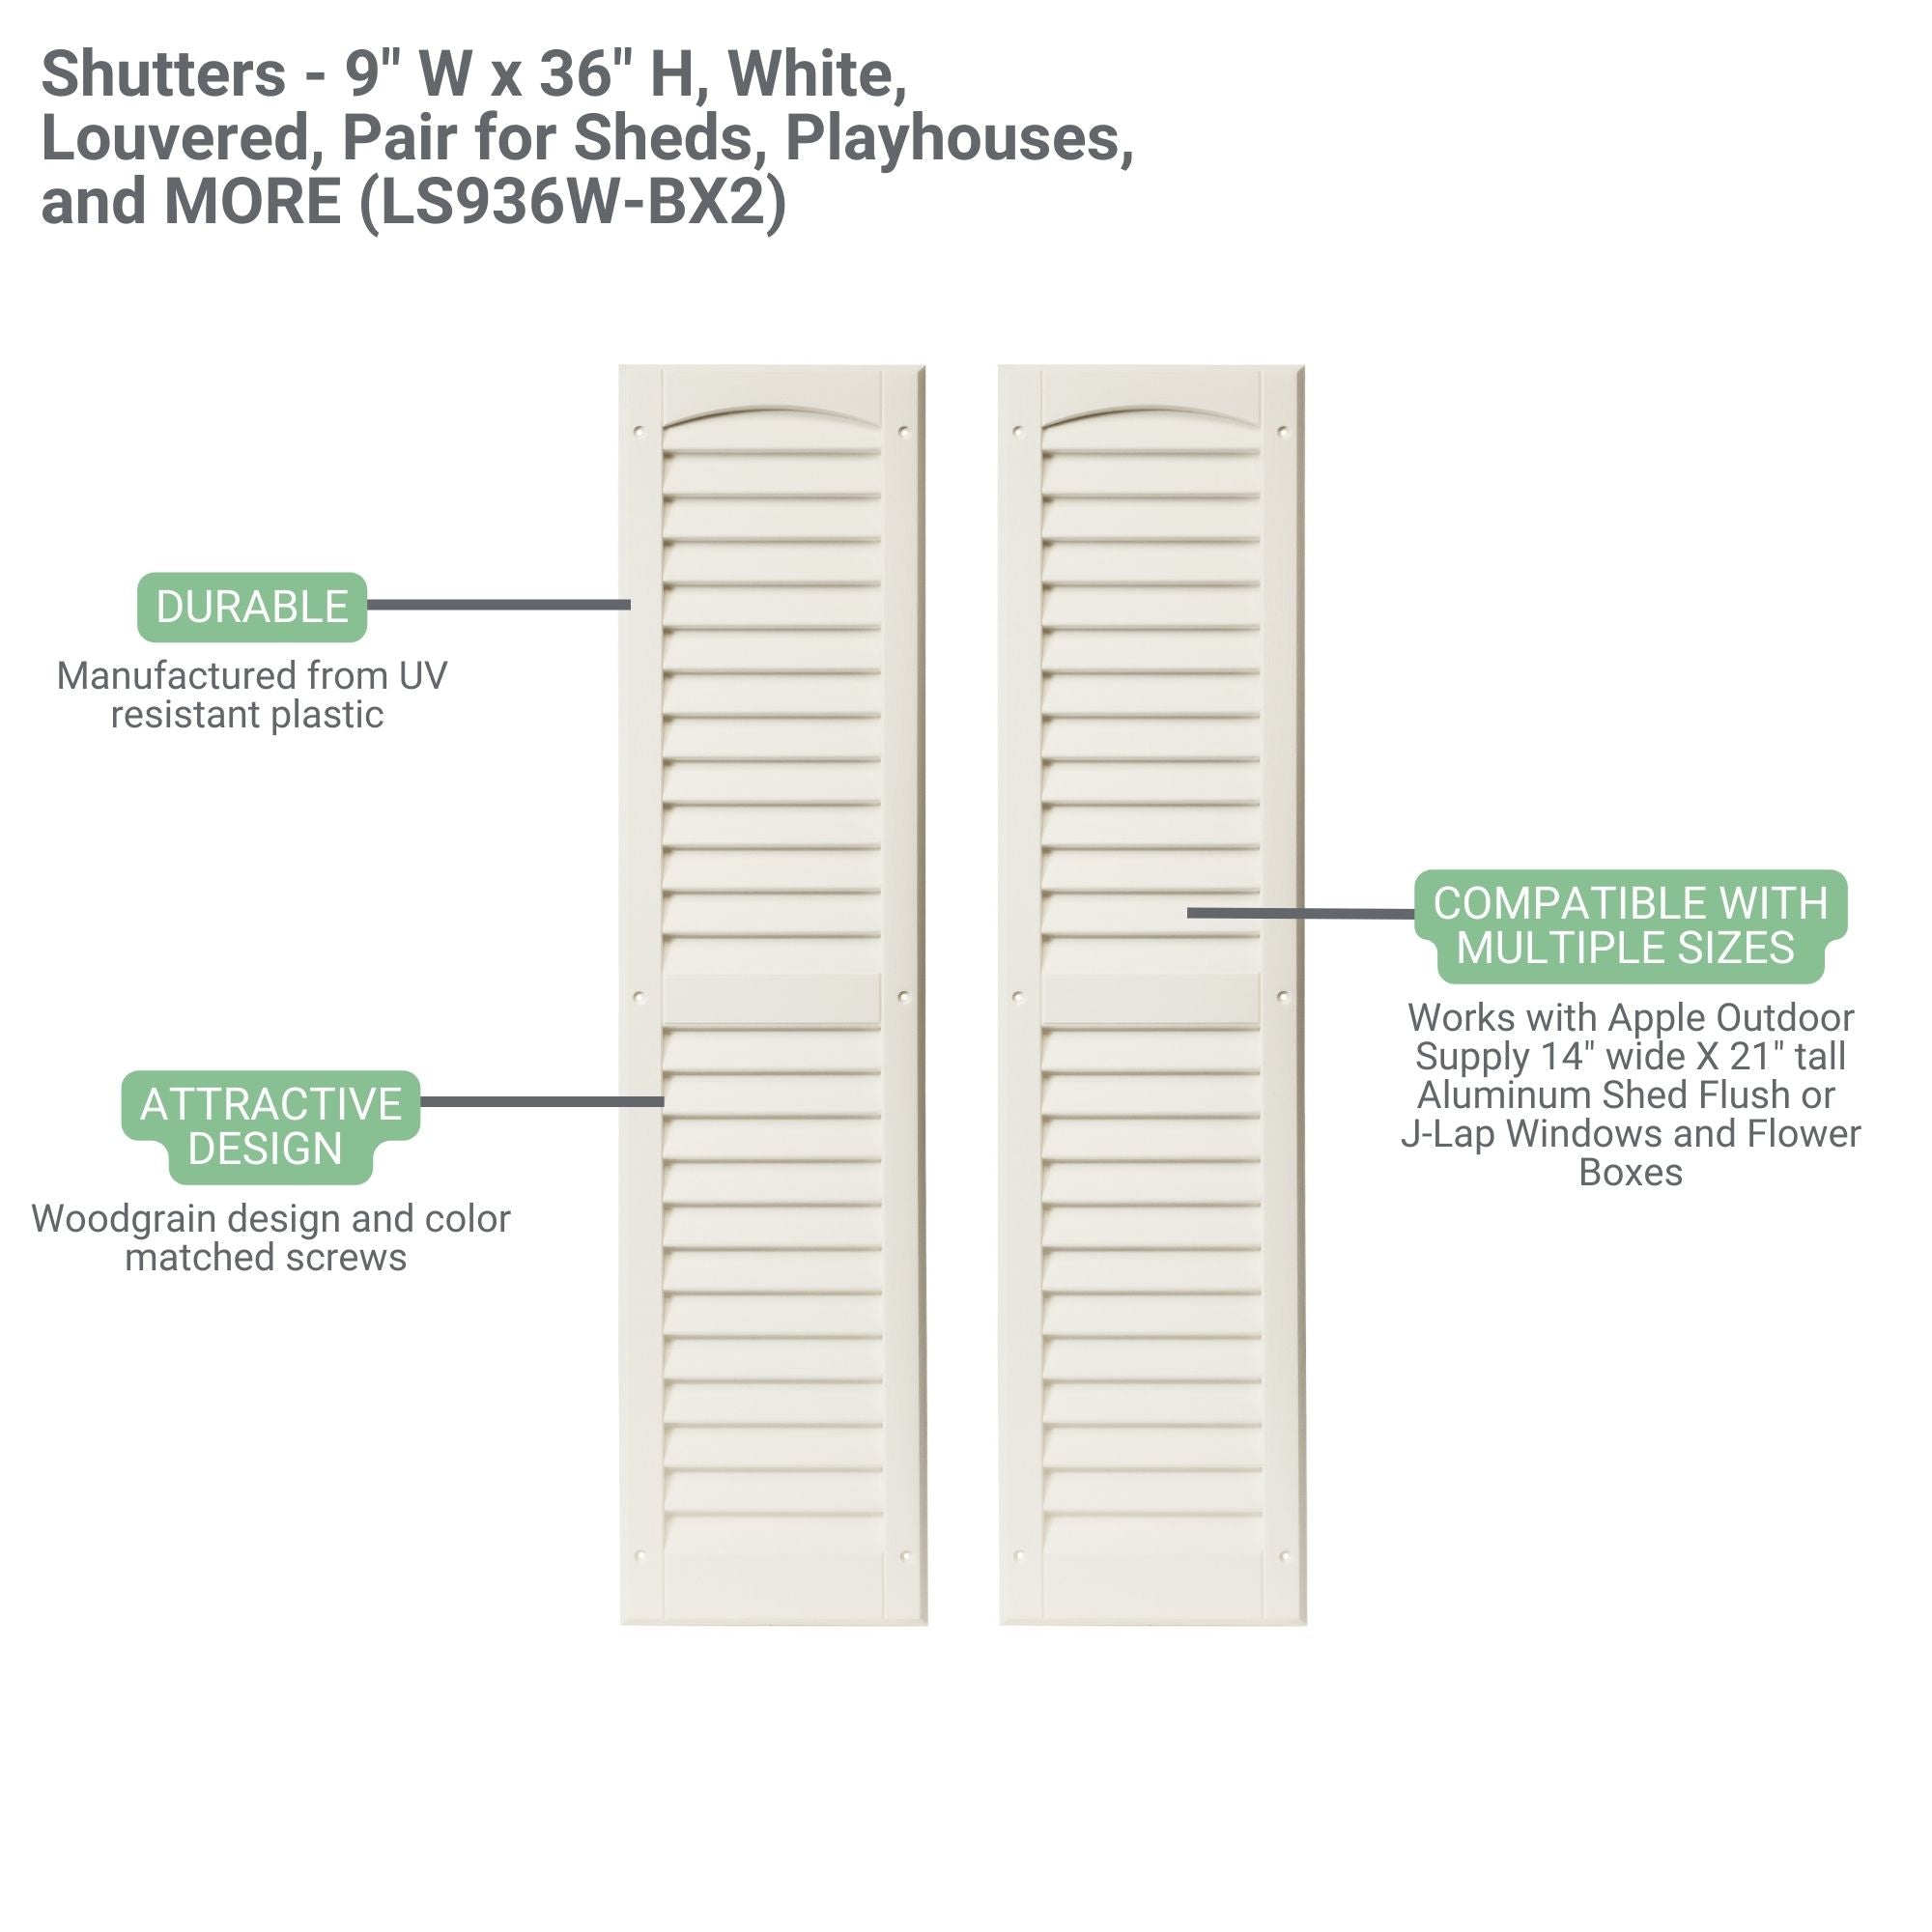 Shutters - 9" W x 36" H Louvered Shutters, Paintable 1 Pair